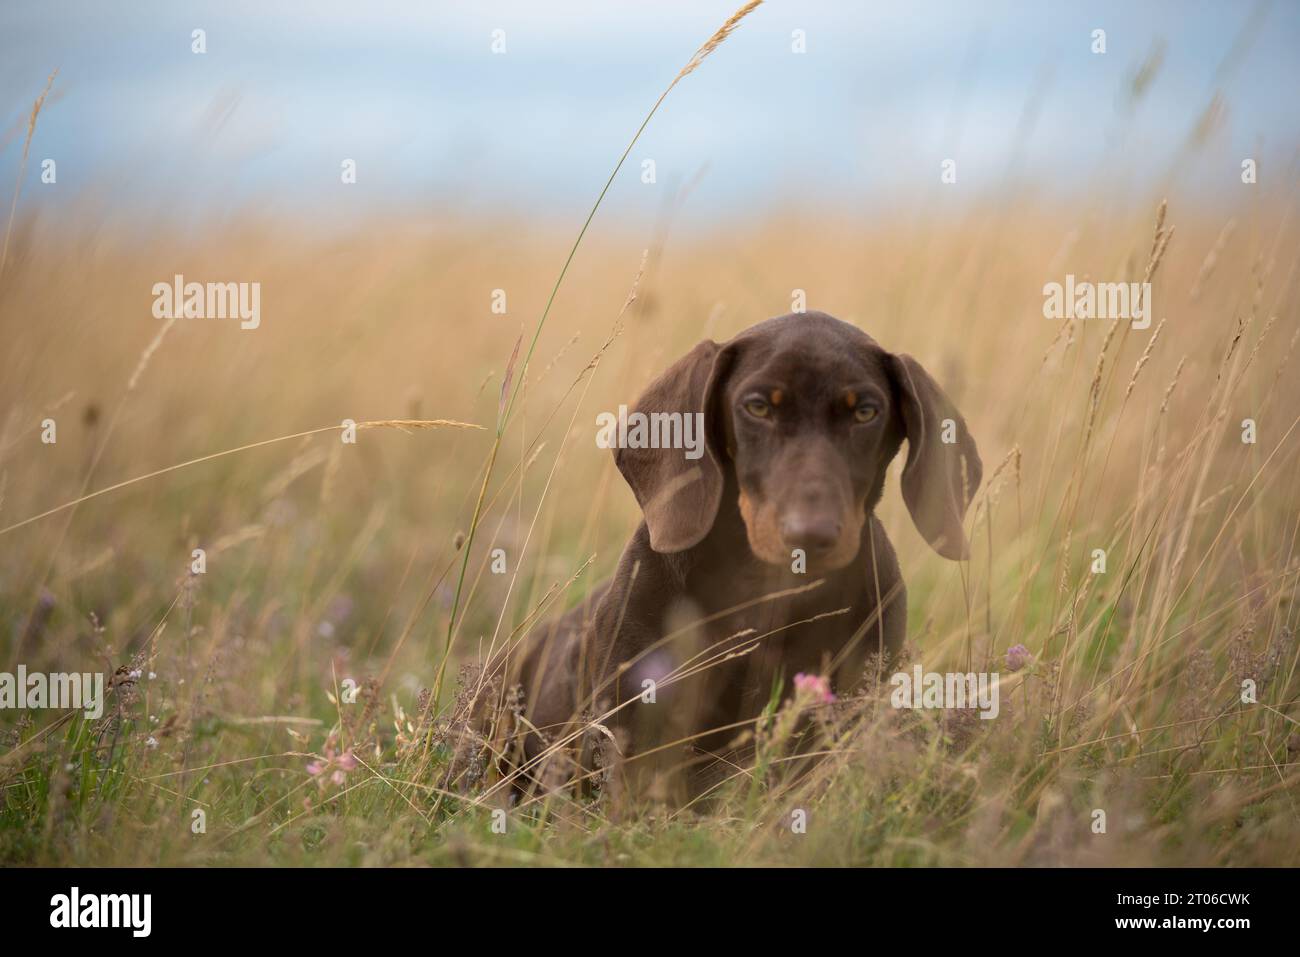 Adorable dachshund puppy playing in the grass Stock Photo